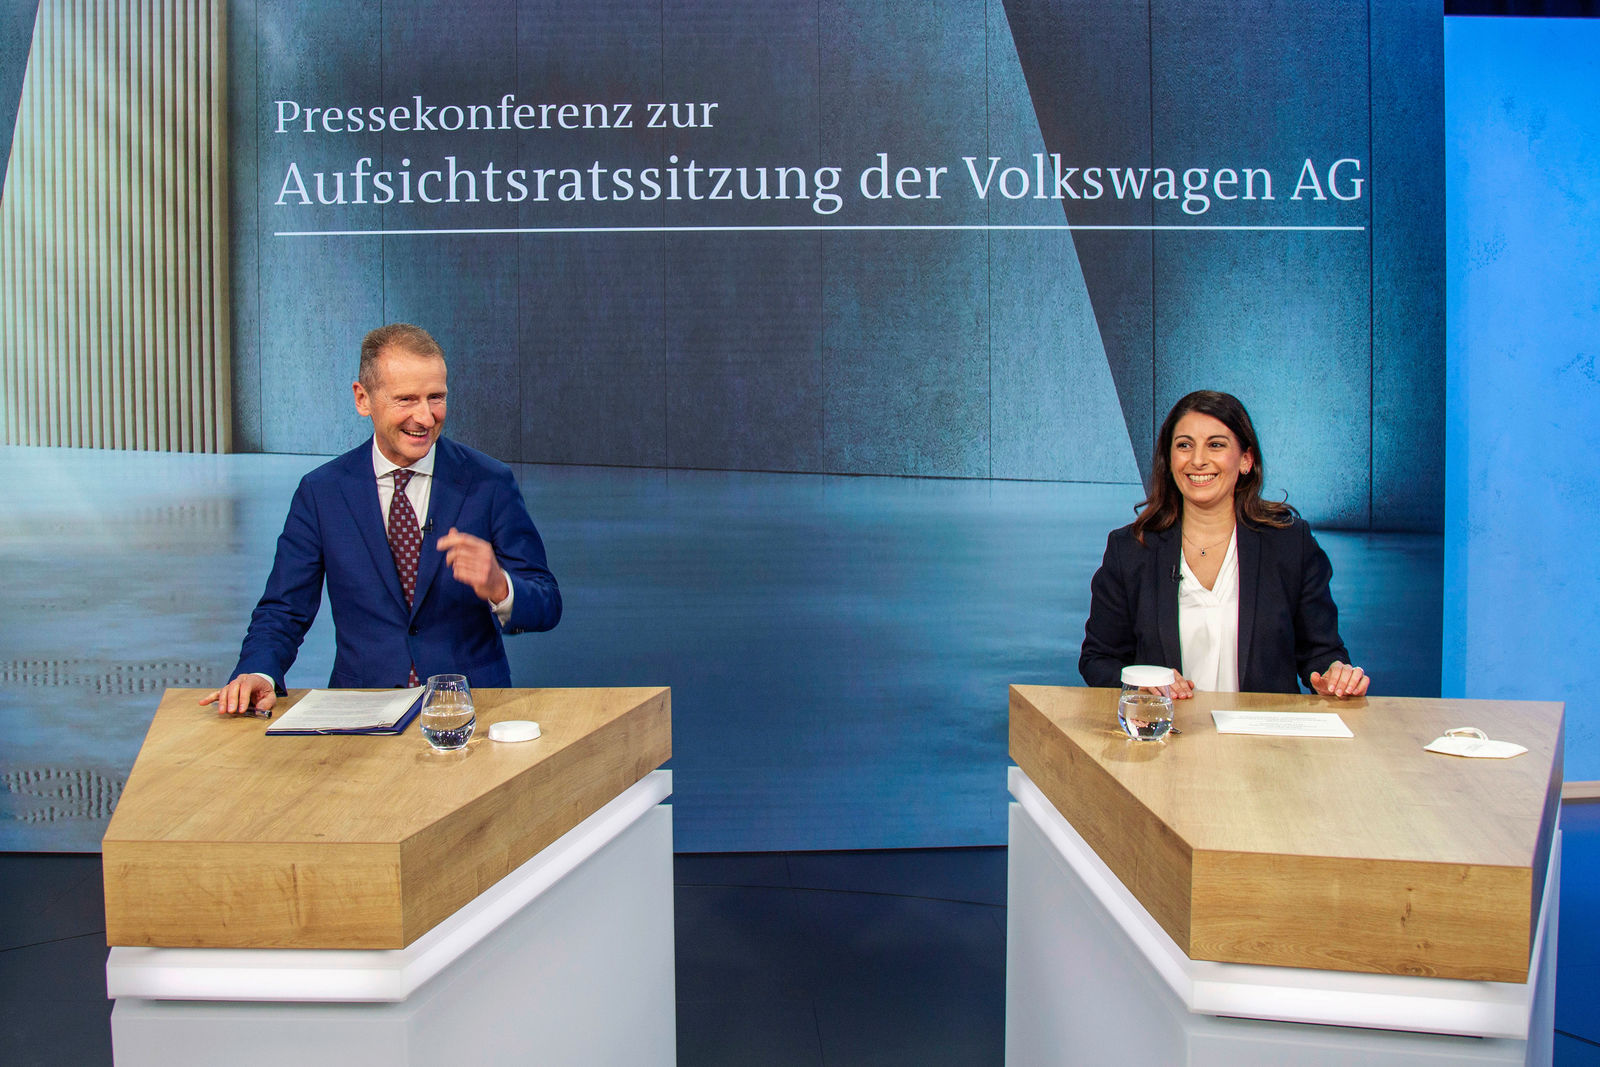 Press conference on the Supervisory Board meeting of Volkswagen AG